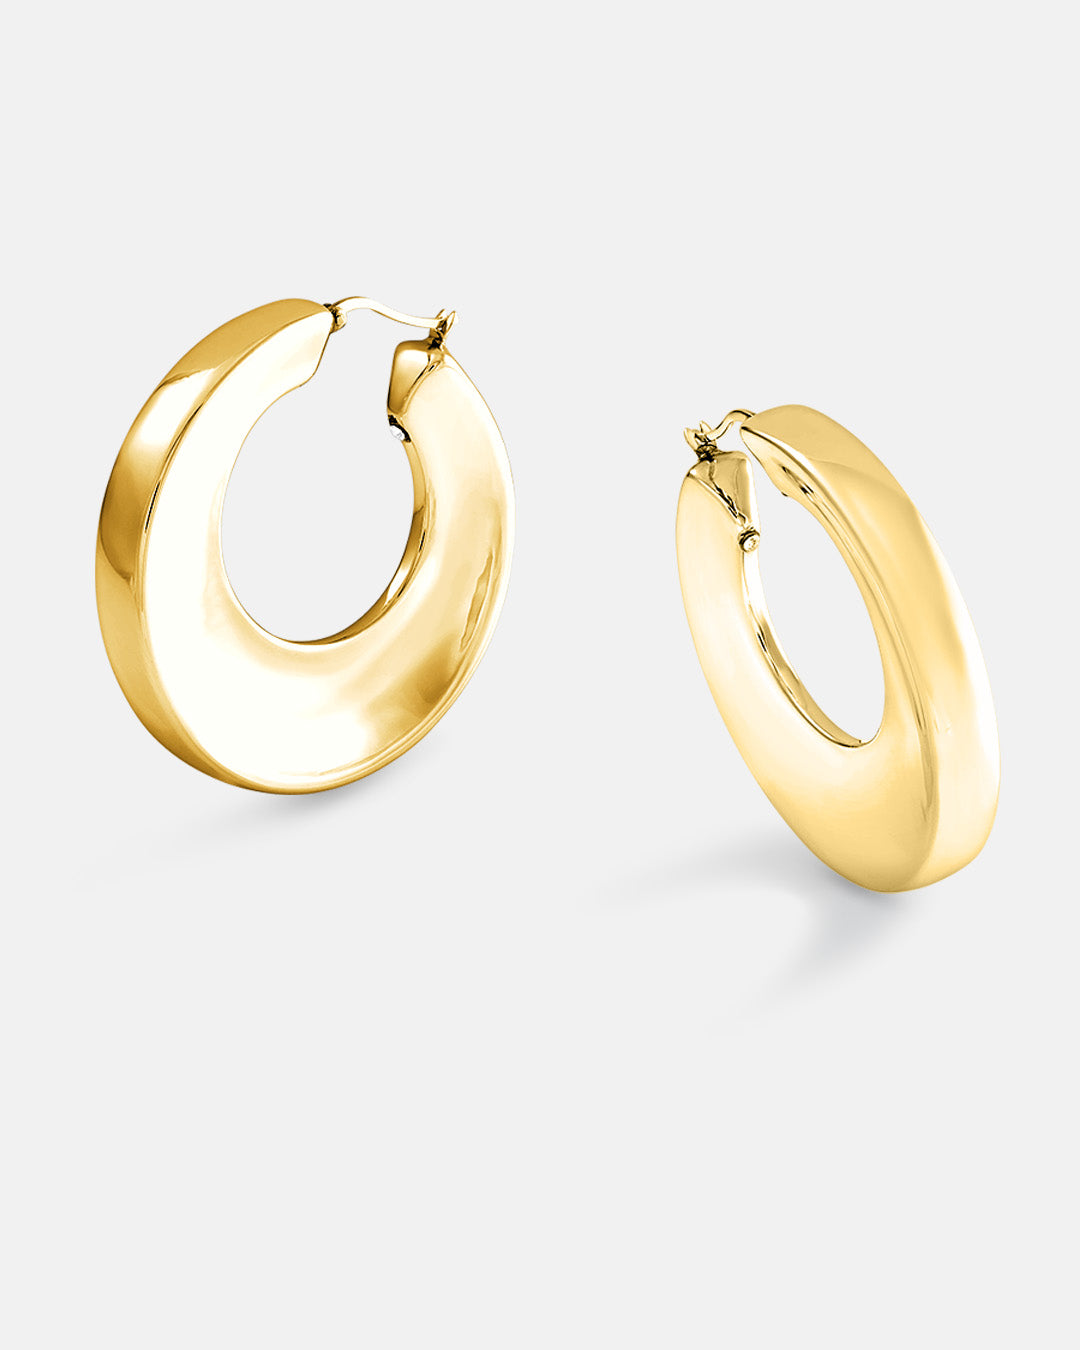 This is product picture of a large round shape organic hoop earrings with a slightly chunky look plated in gold in sterling silver material